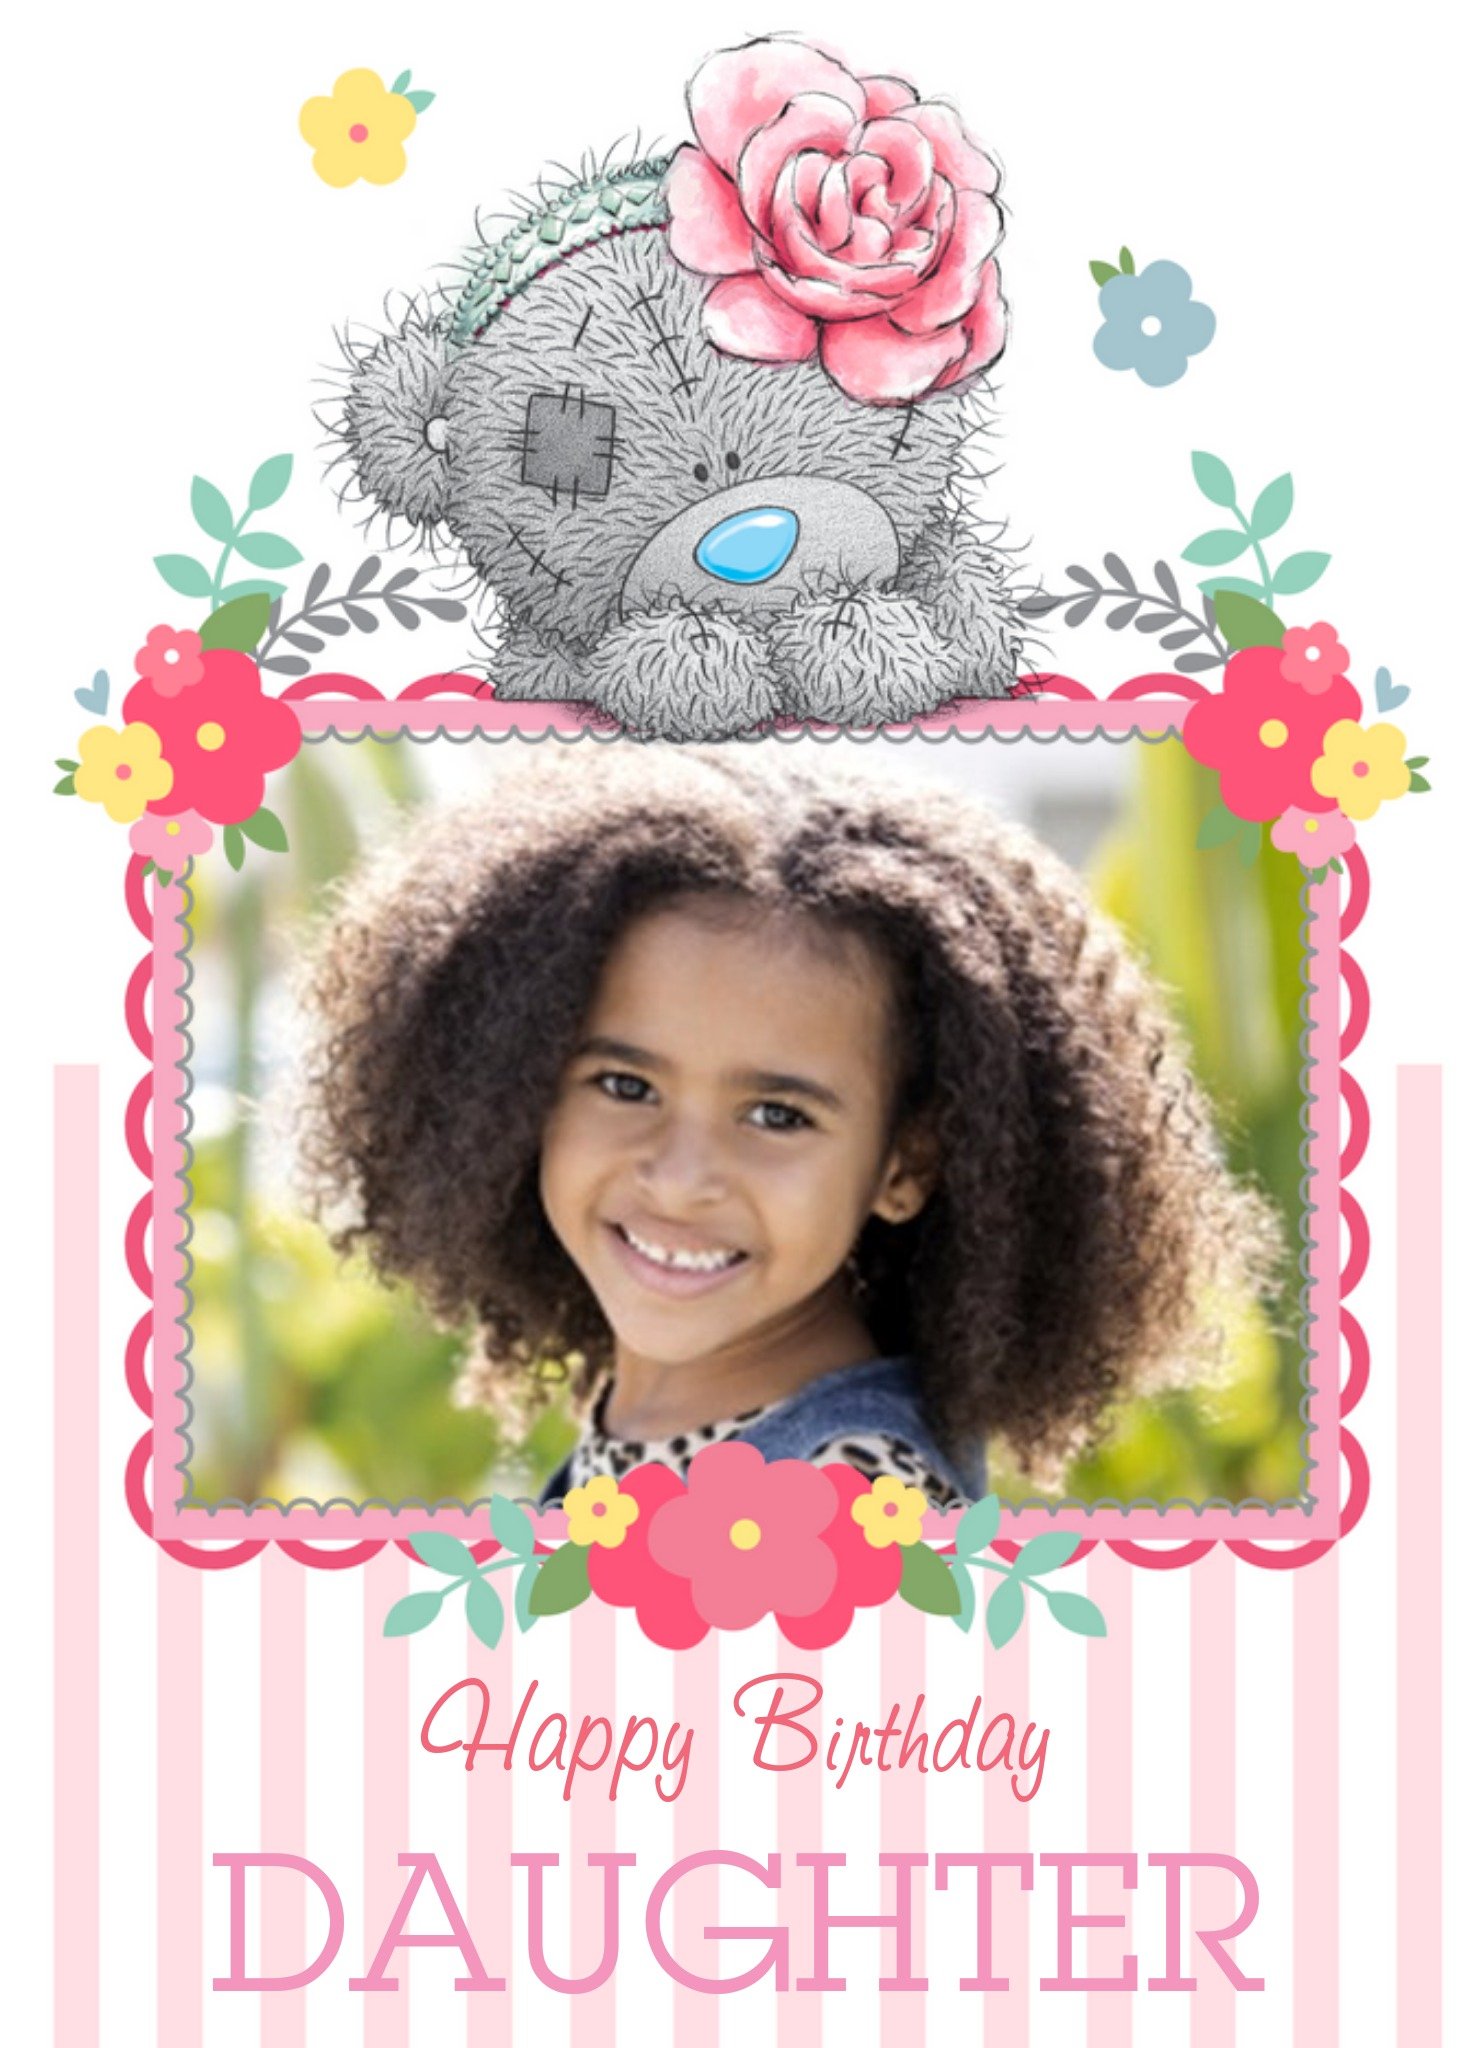 Me To You Tatty Teddy With Rose Headband Personalised Photo Upload Birthday Card For Daughter, Large